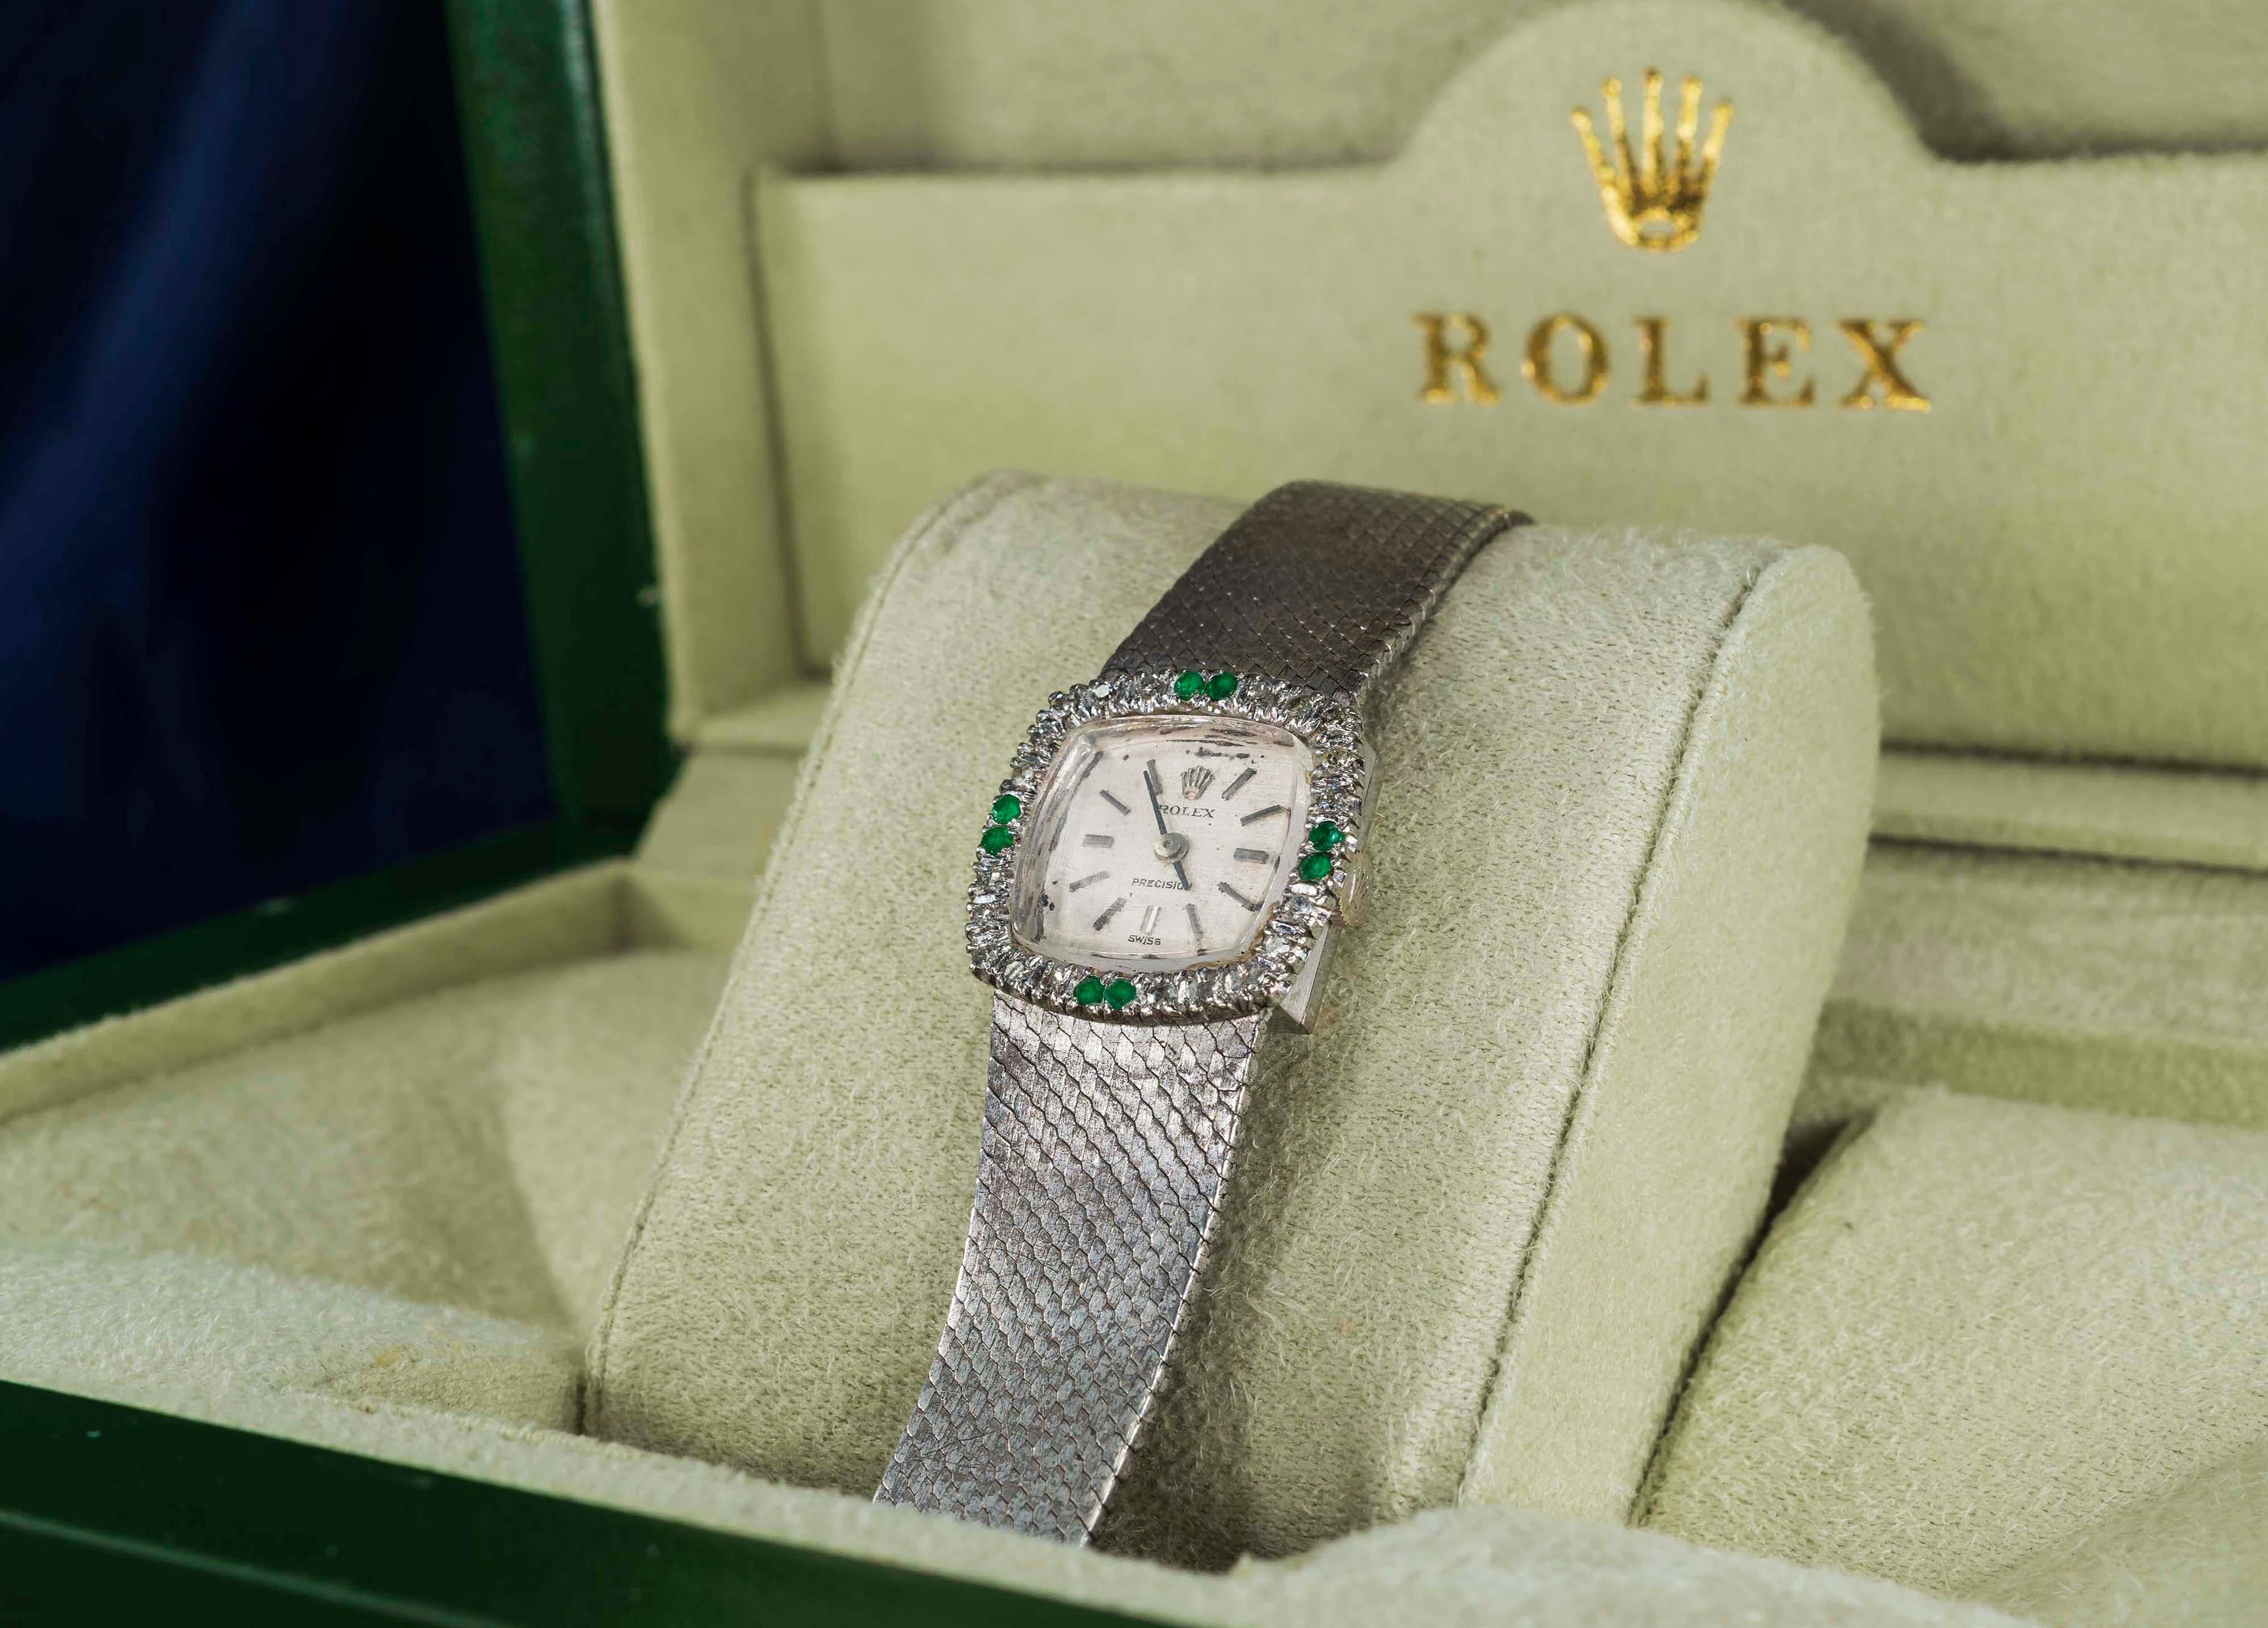 An Iconic 1960s Rolex 18kt White Gold Emerald & Diamond Set Bracelet Watch

Basic Dimensions & Specifications 
⁃     Case Dimensions 21mm Width x 21mm Height
-	Wrist Size Fits up 170mm wrist 
 * Can be resized to be extended or tapered as a